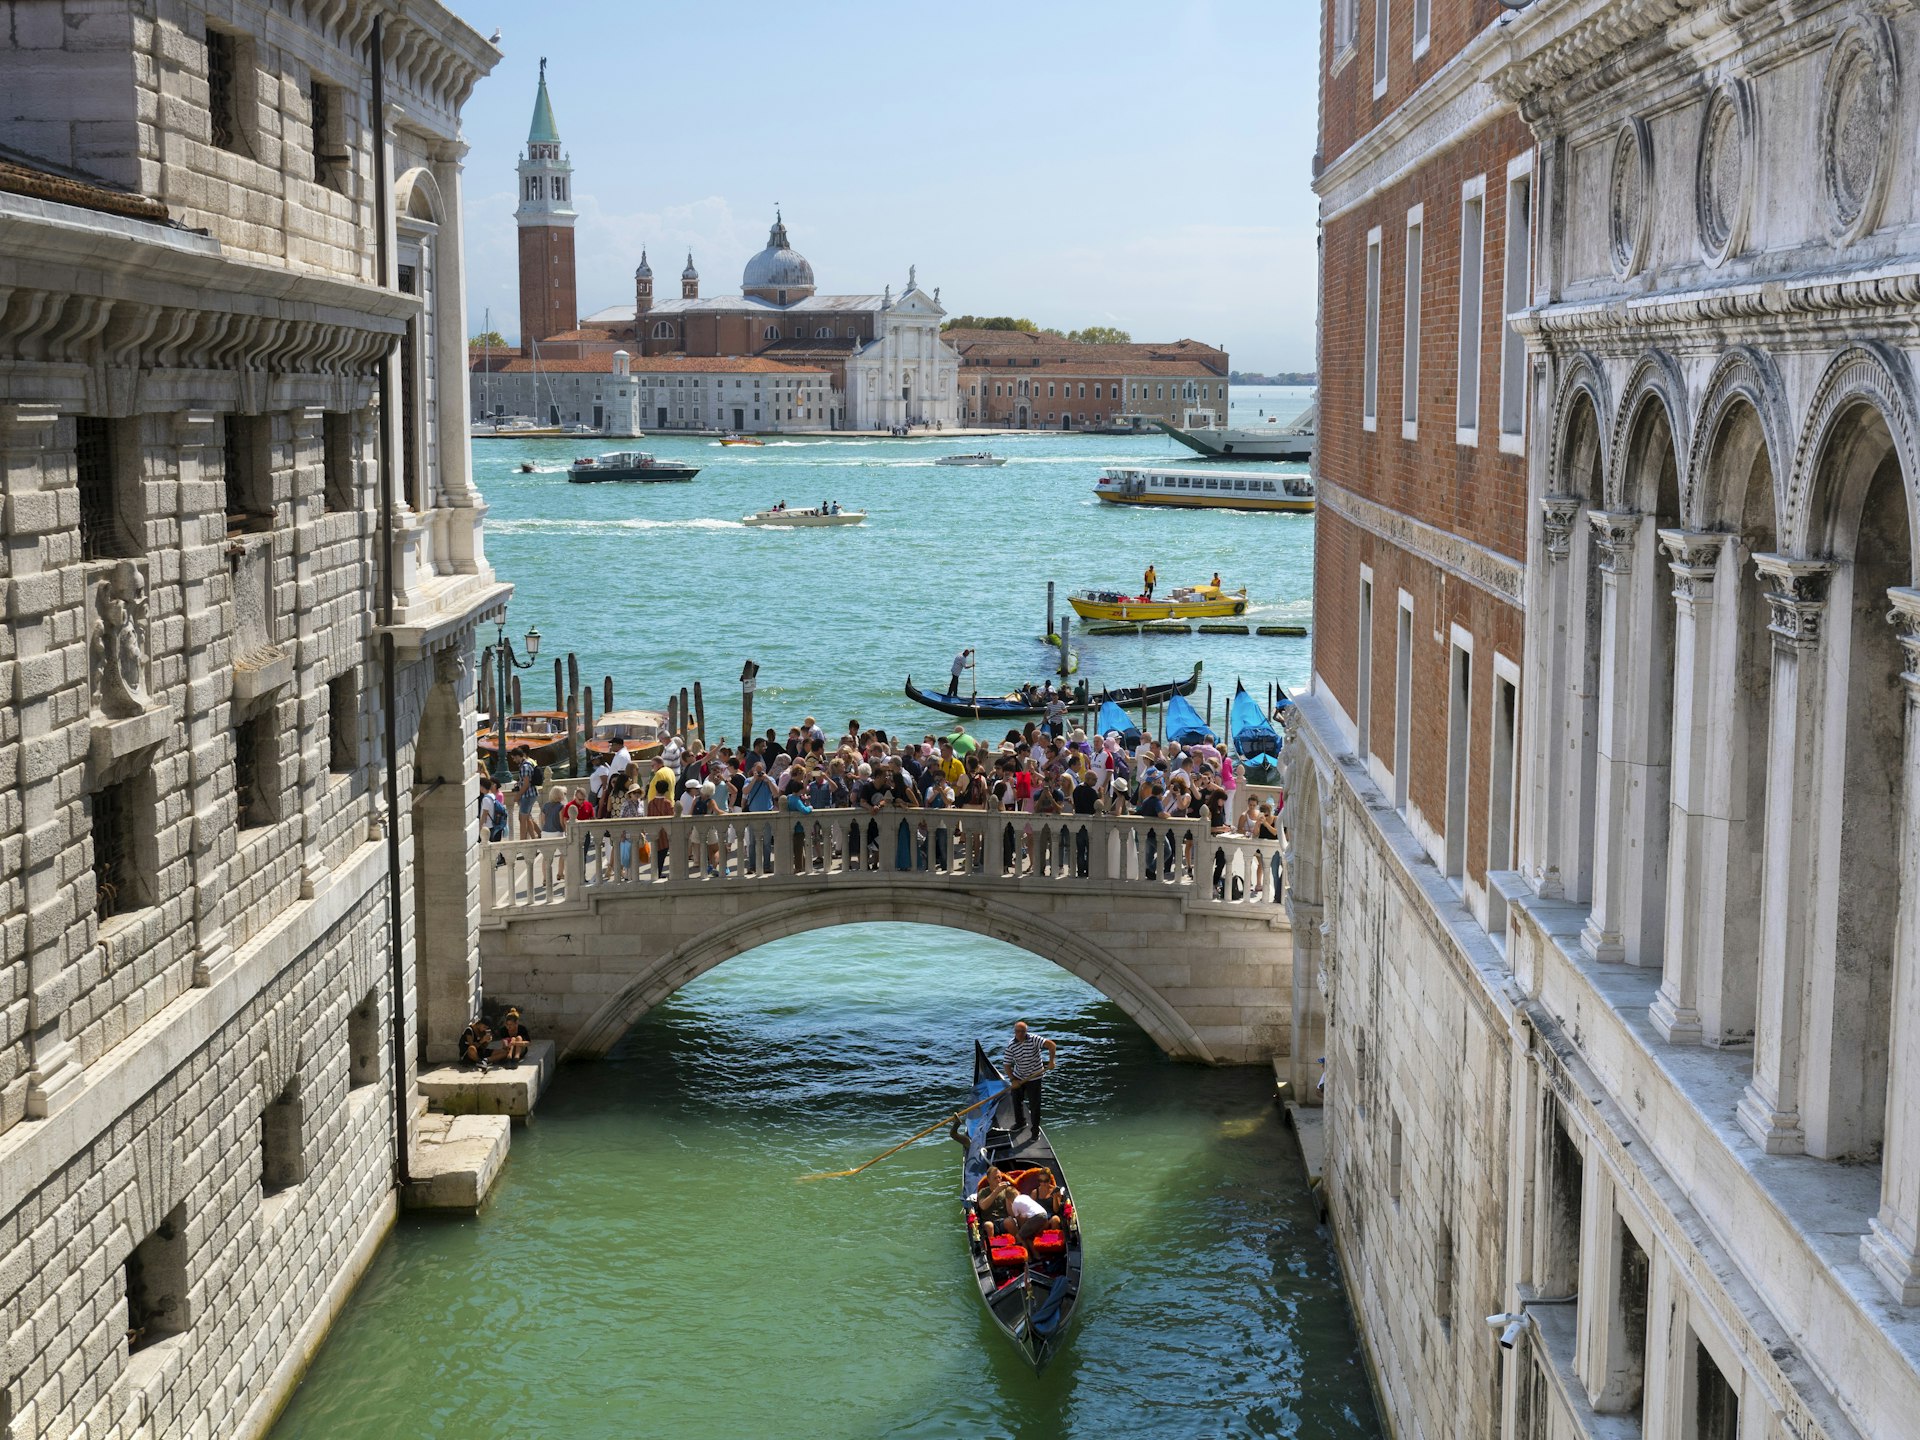 A shot down a narrow canal towards a bridge that is packed with people. A gondola passes underneath